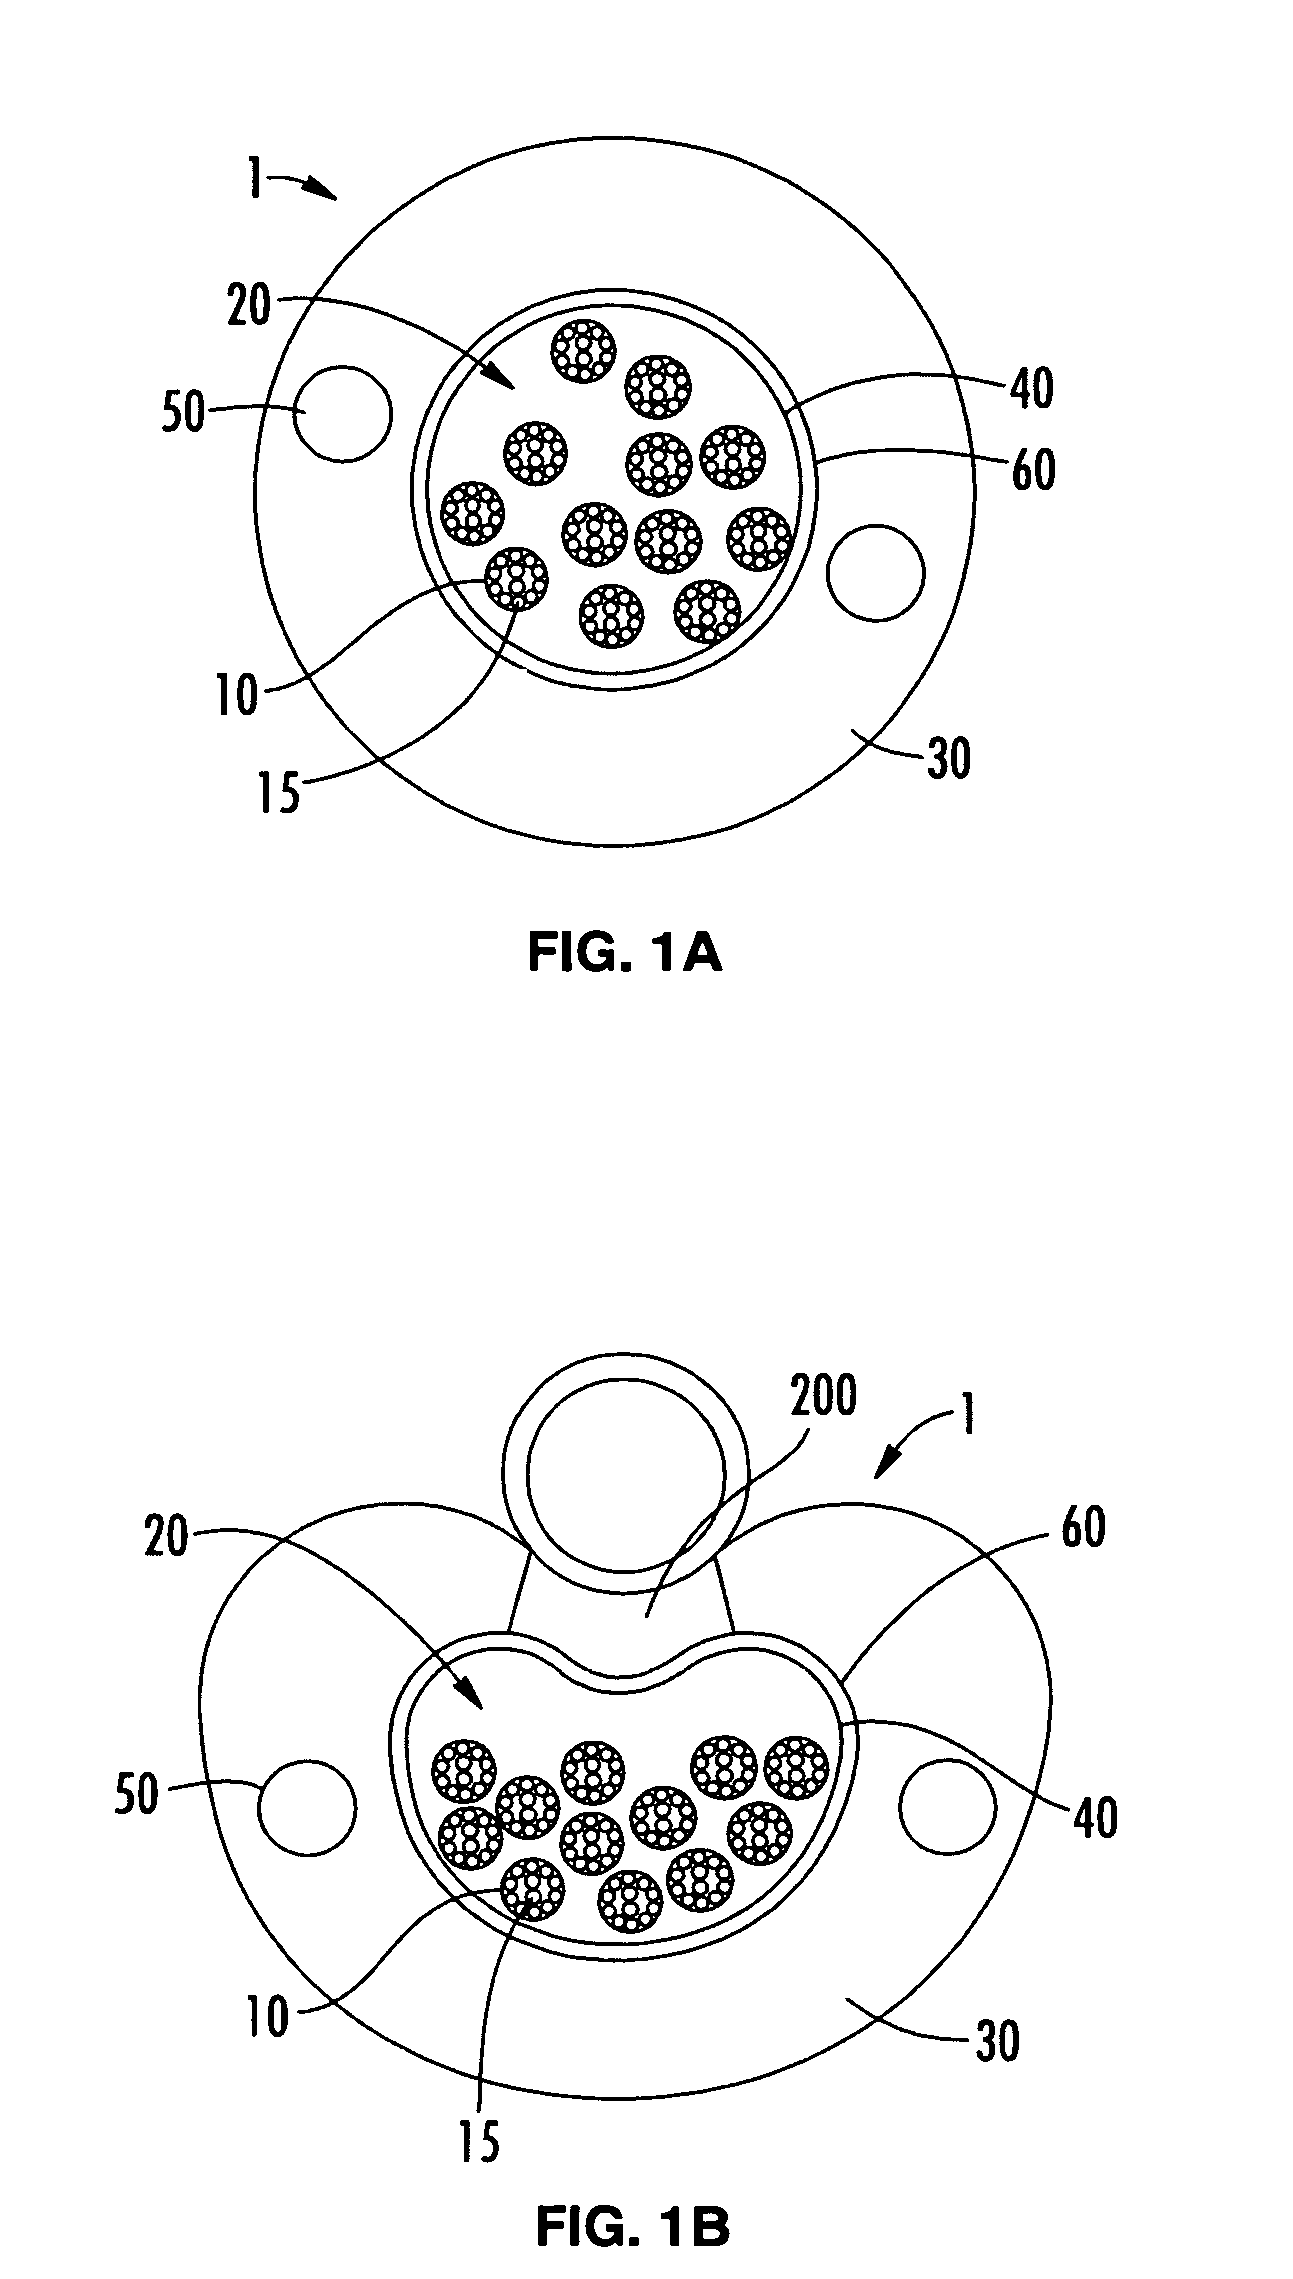 Method for accessing optical fibers within a telecommunication cable